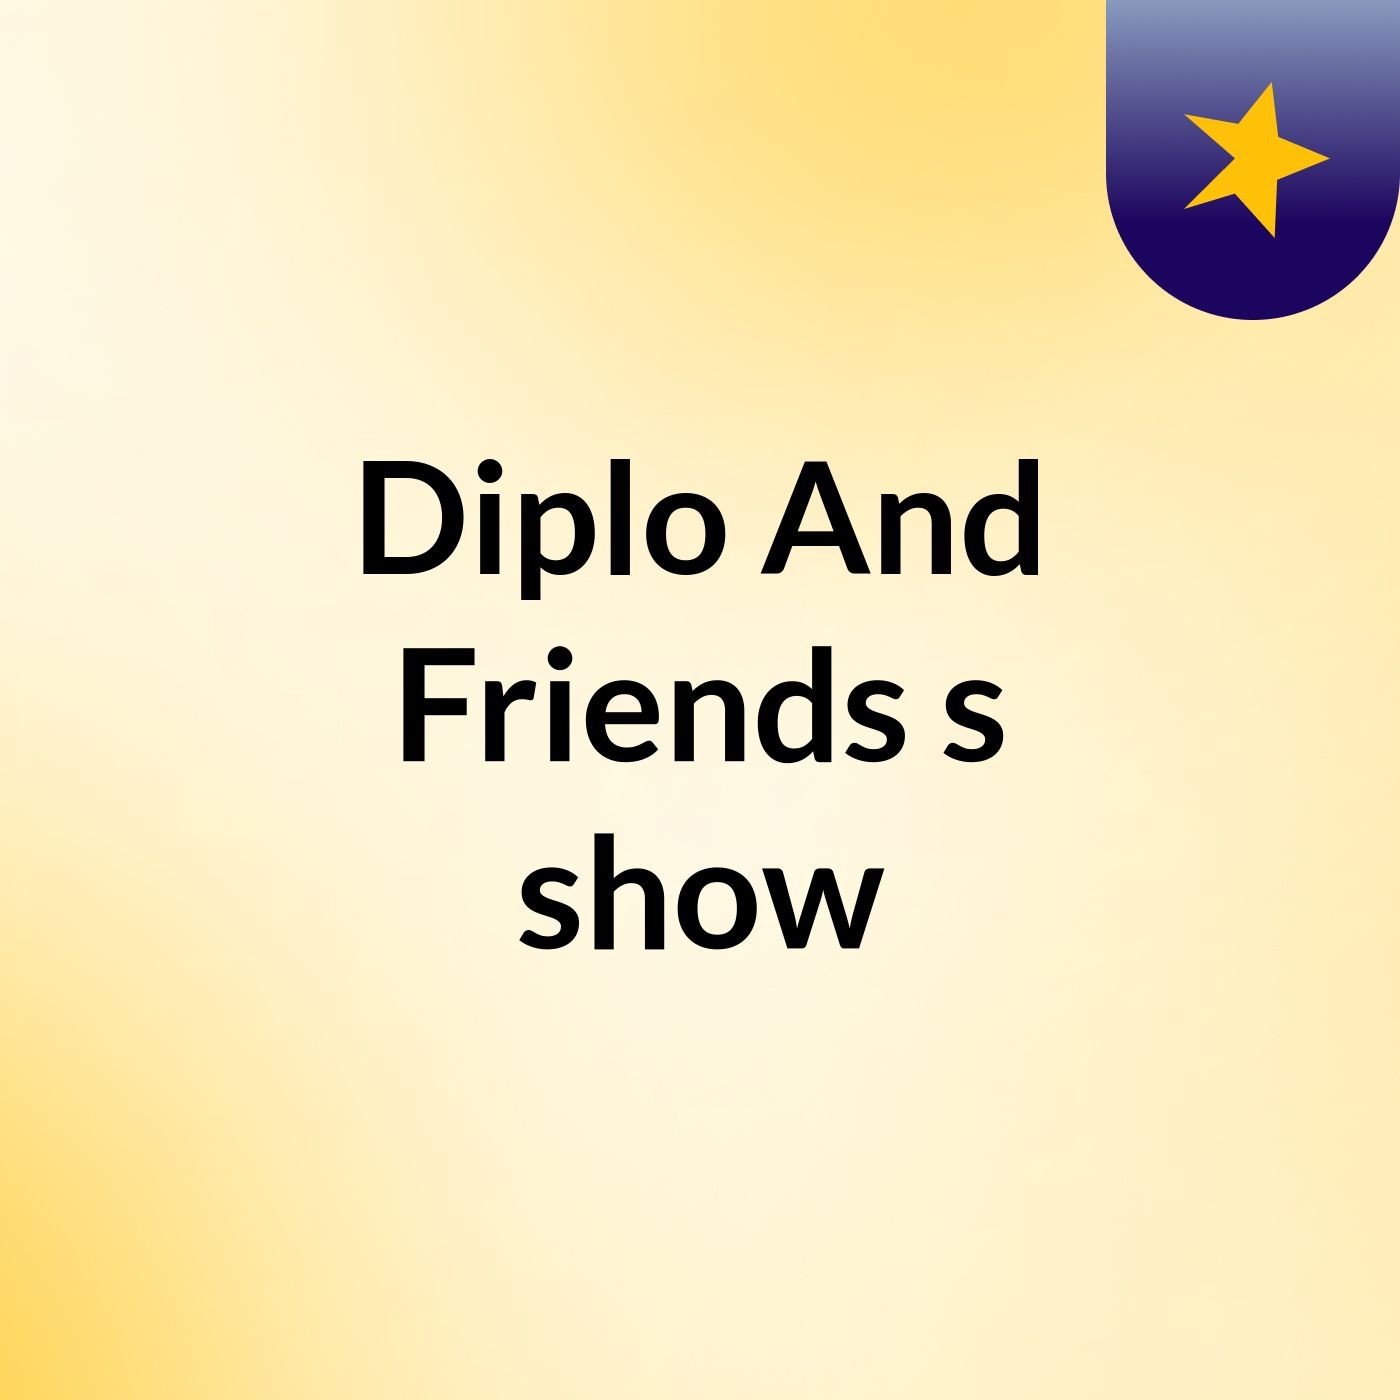 Diplo And Friends's show